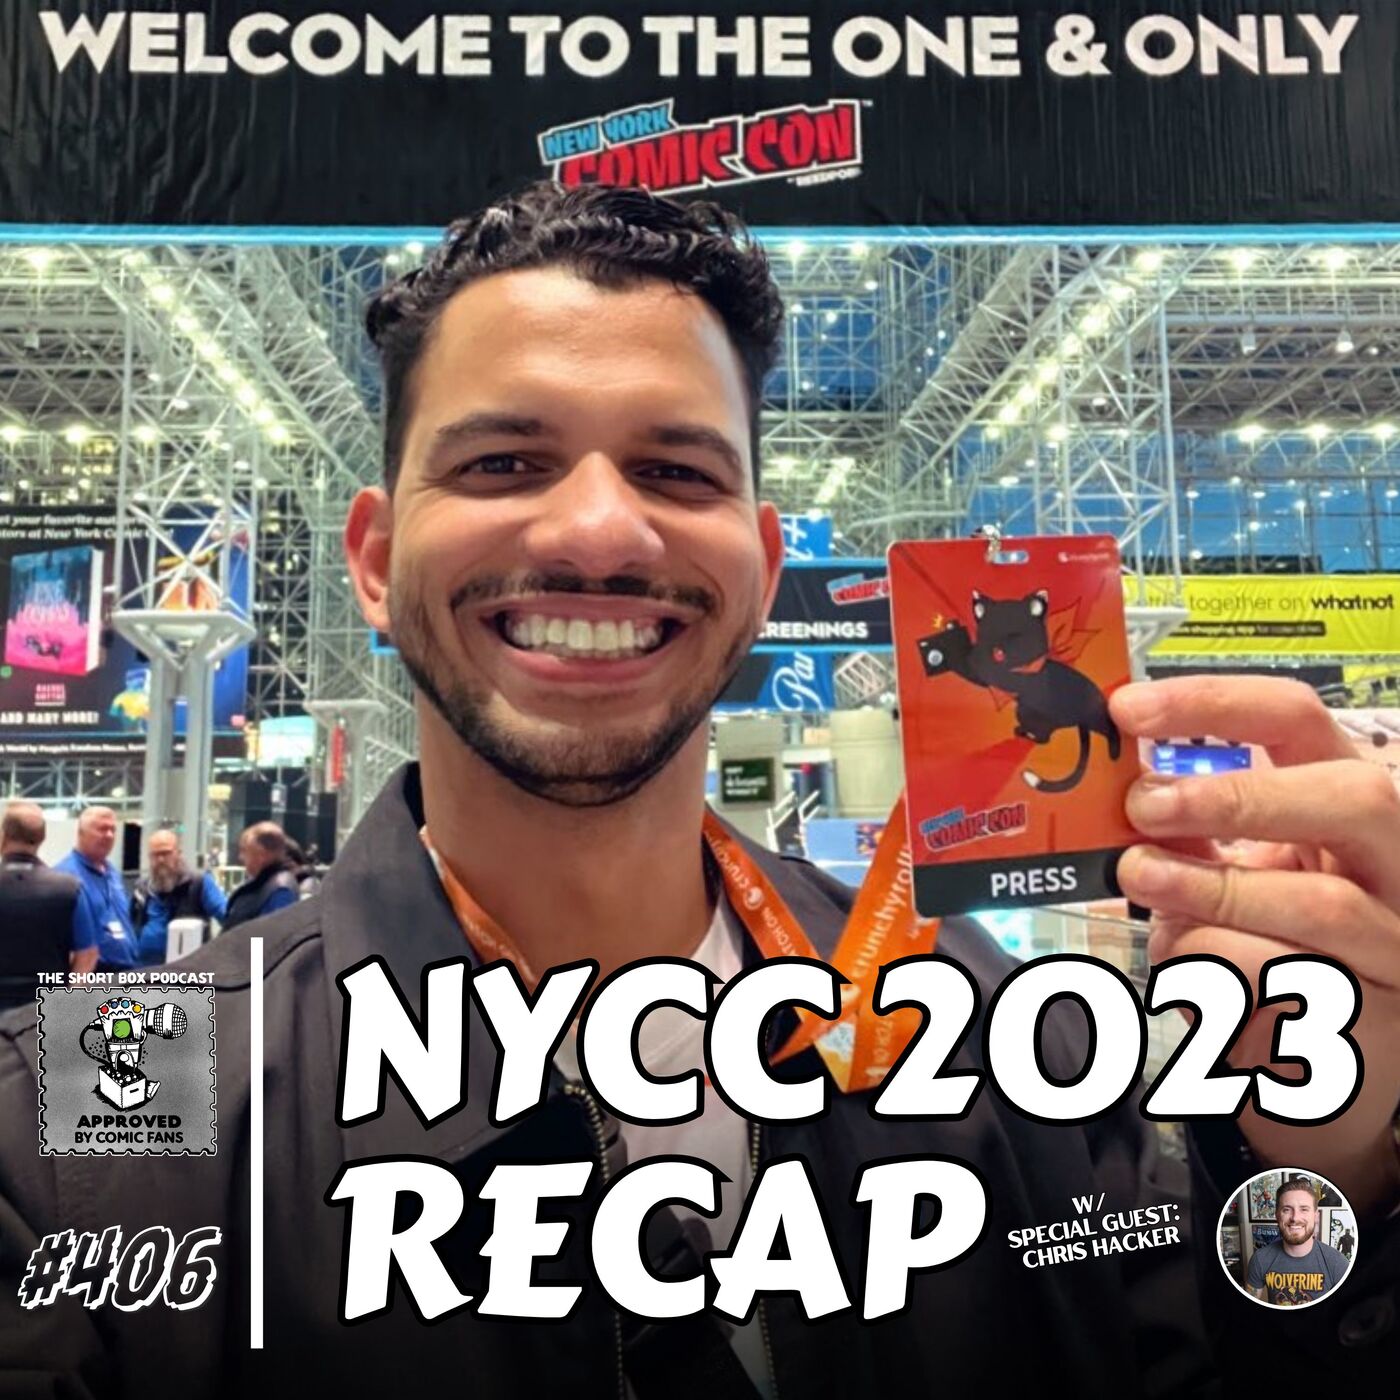 NYCC 2023 Full Recap Highlights, Regrets, and How to Prepare for New